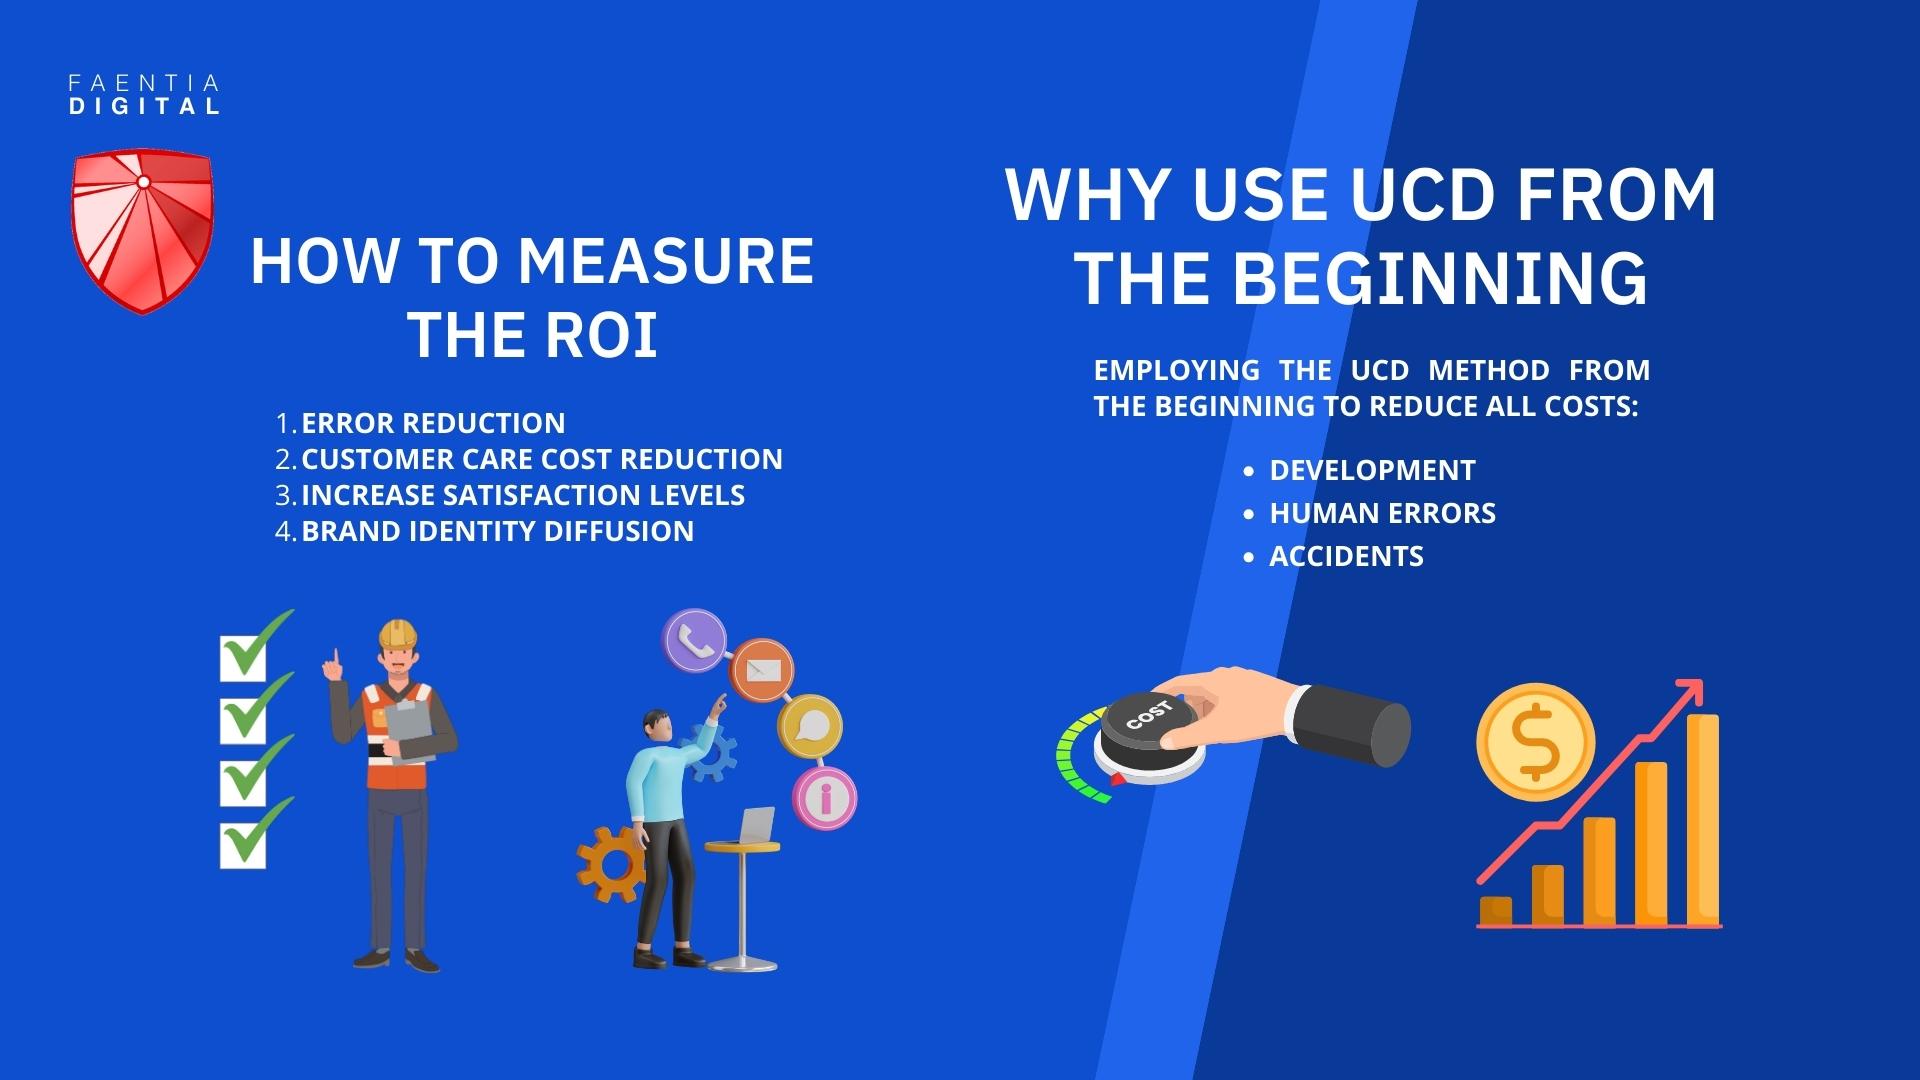 How to measure the roi